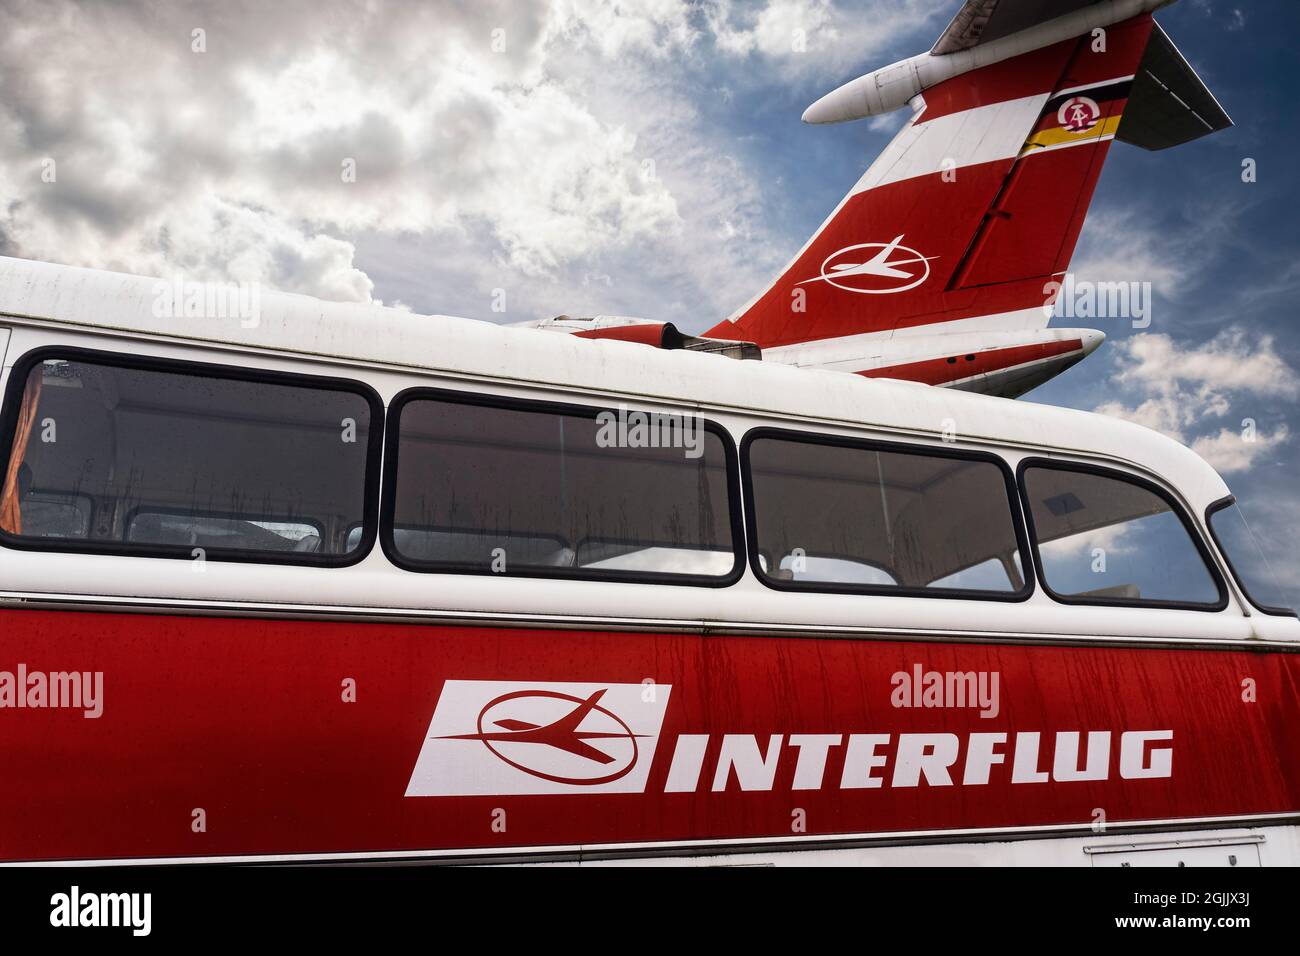 Detail of a bus and tail unit of an airplane from Interflug Stock Photo